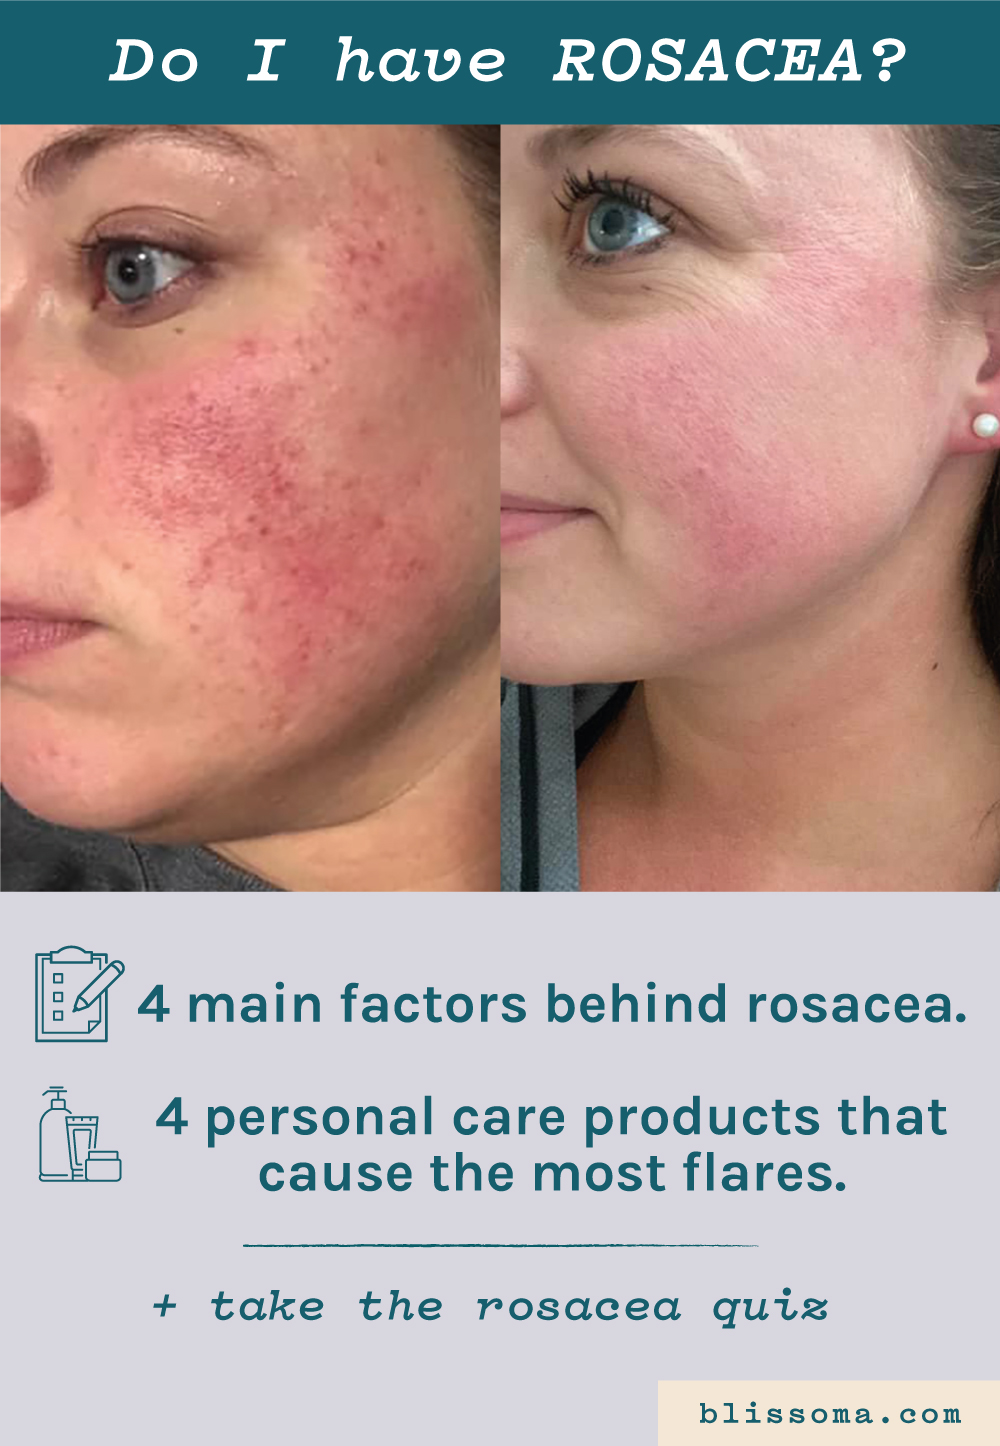 Do I have rosacea quiz - how your microbiome may be to blame plus the 4 main causes of rosacea and personal care products that can cause flares